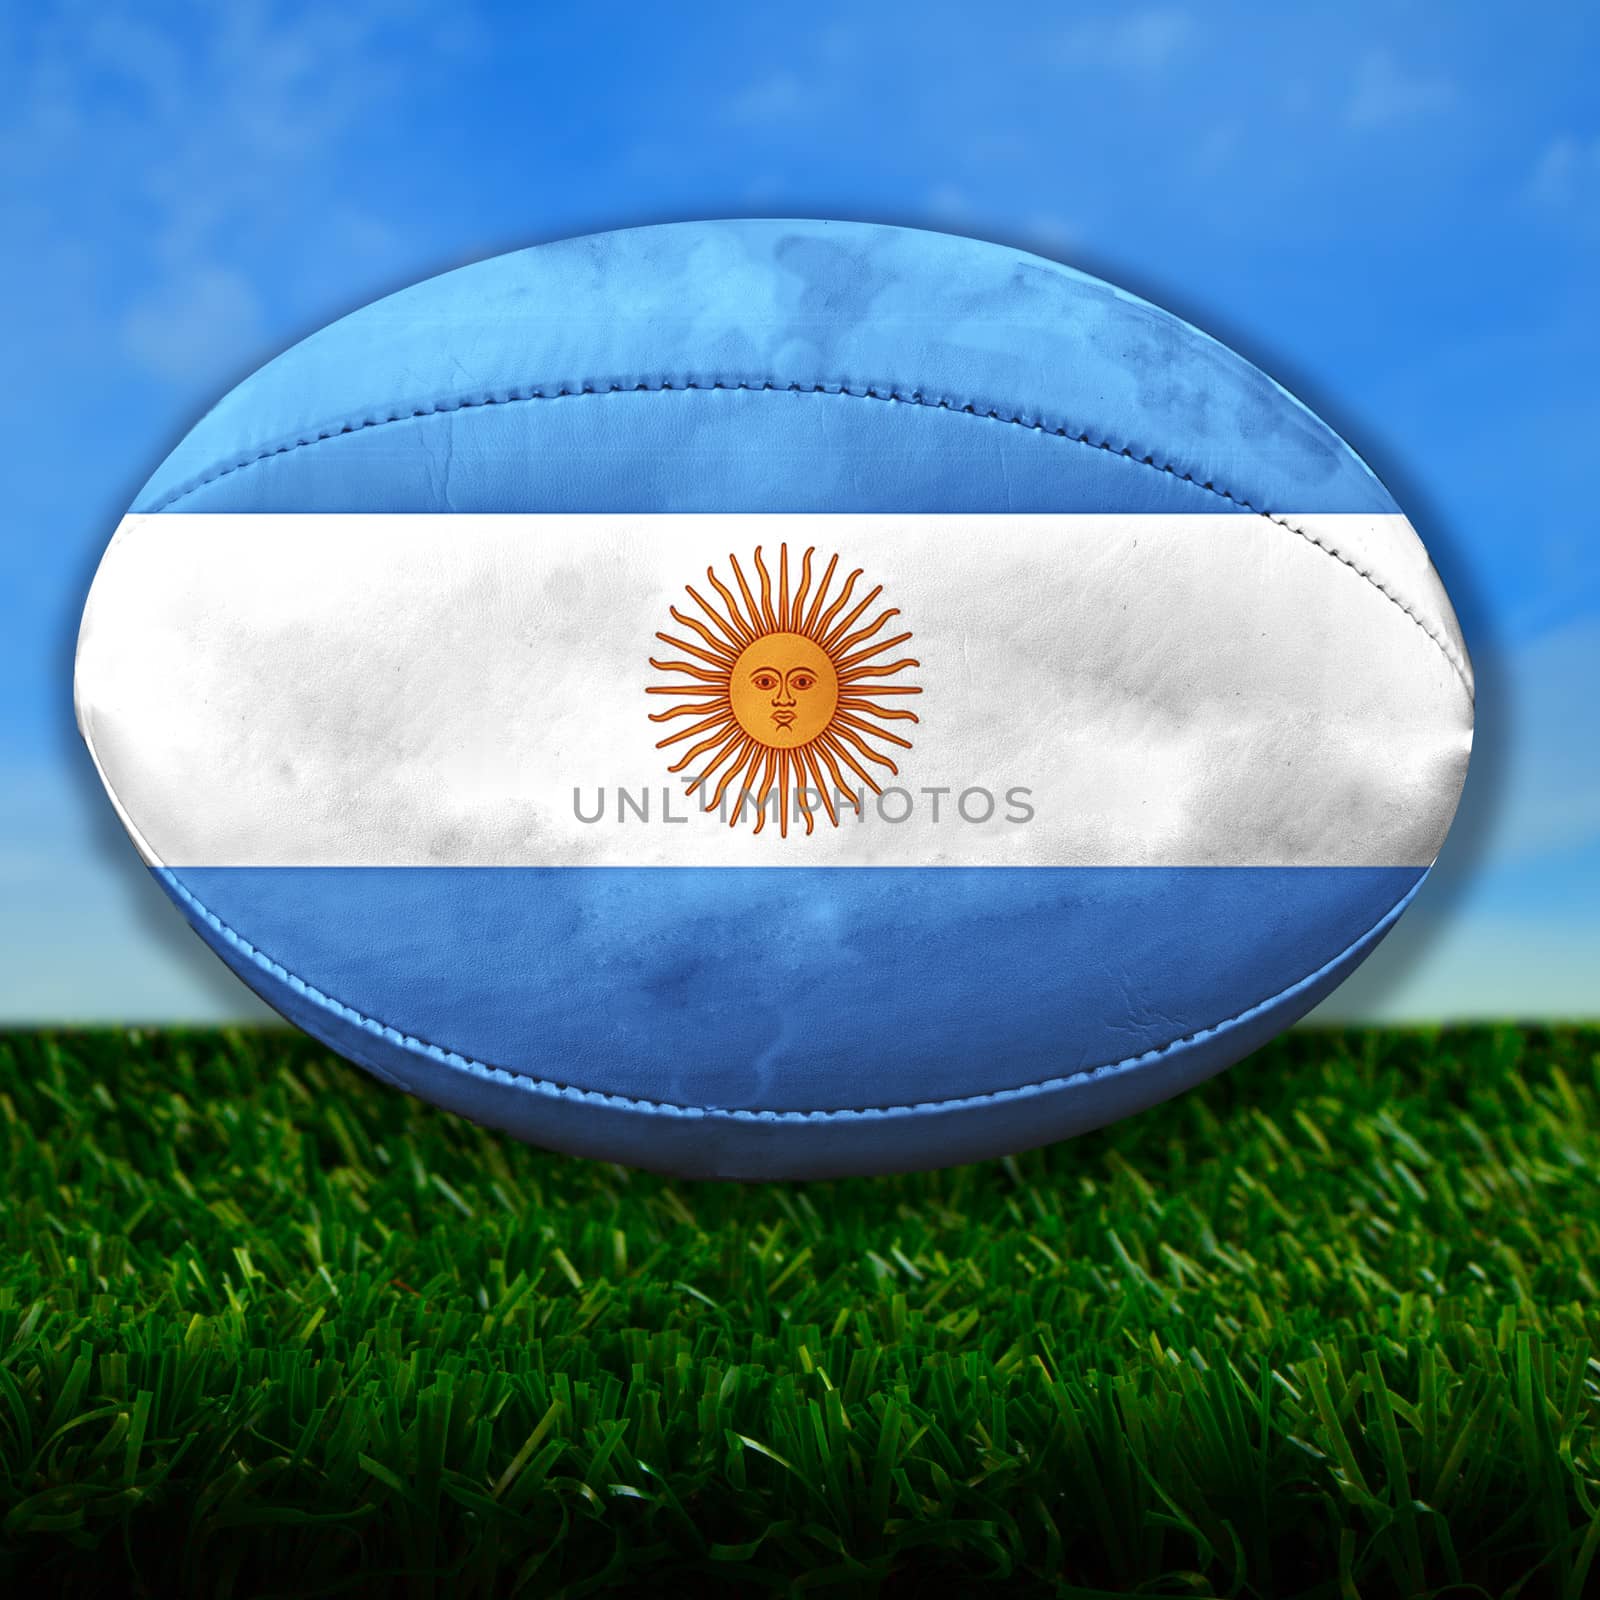 Argentina Rugby by Koufax73